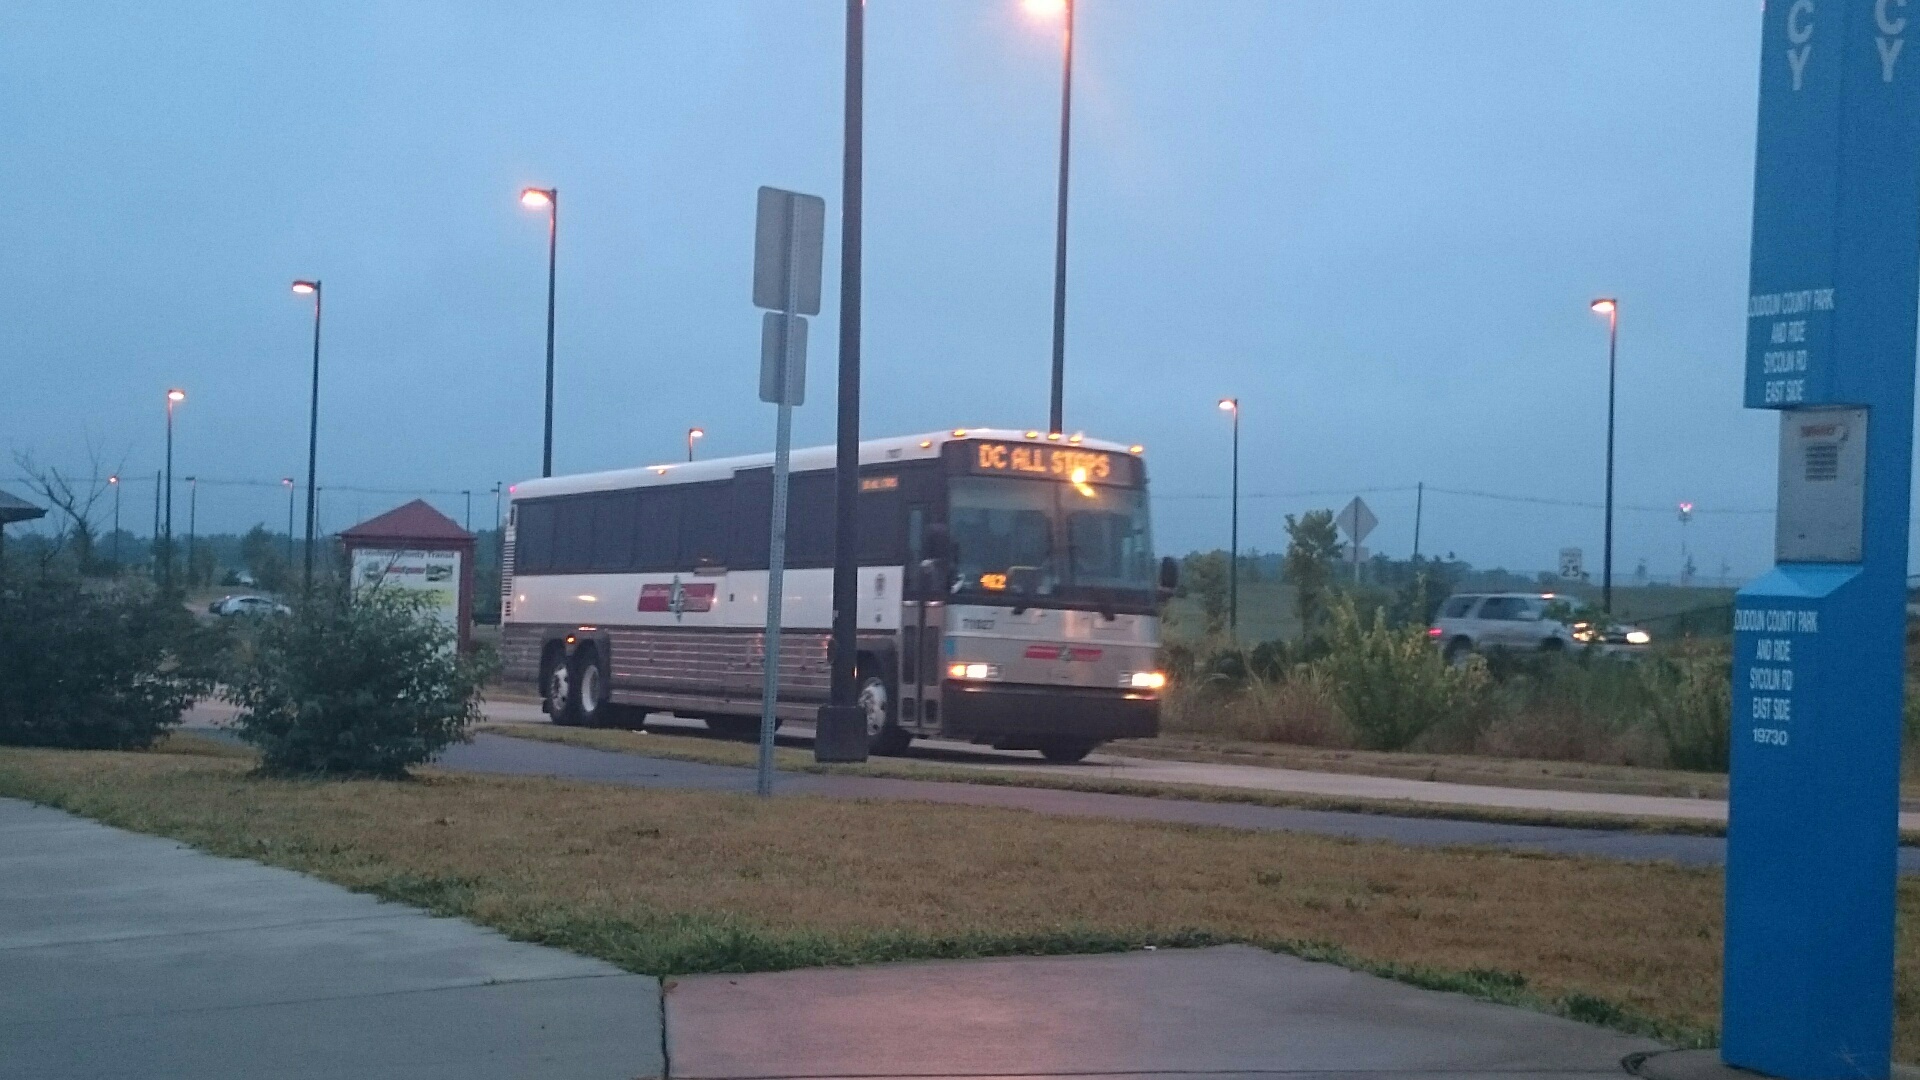 Loudoun County commuter bus service back to normal; work disruption ends